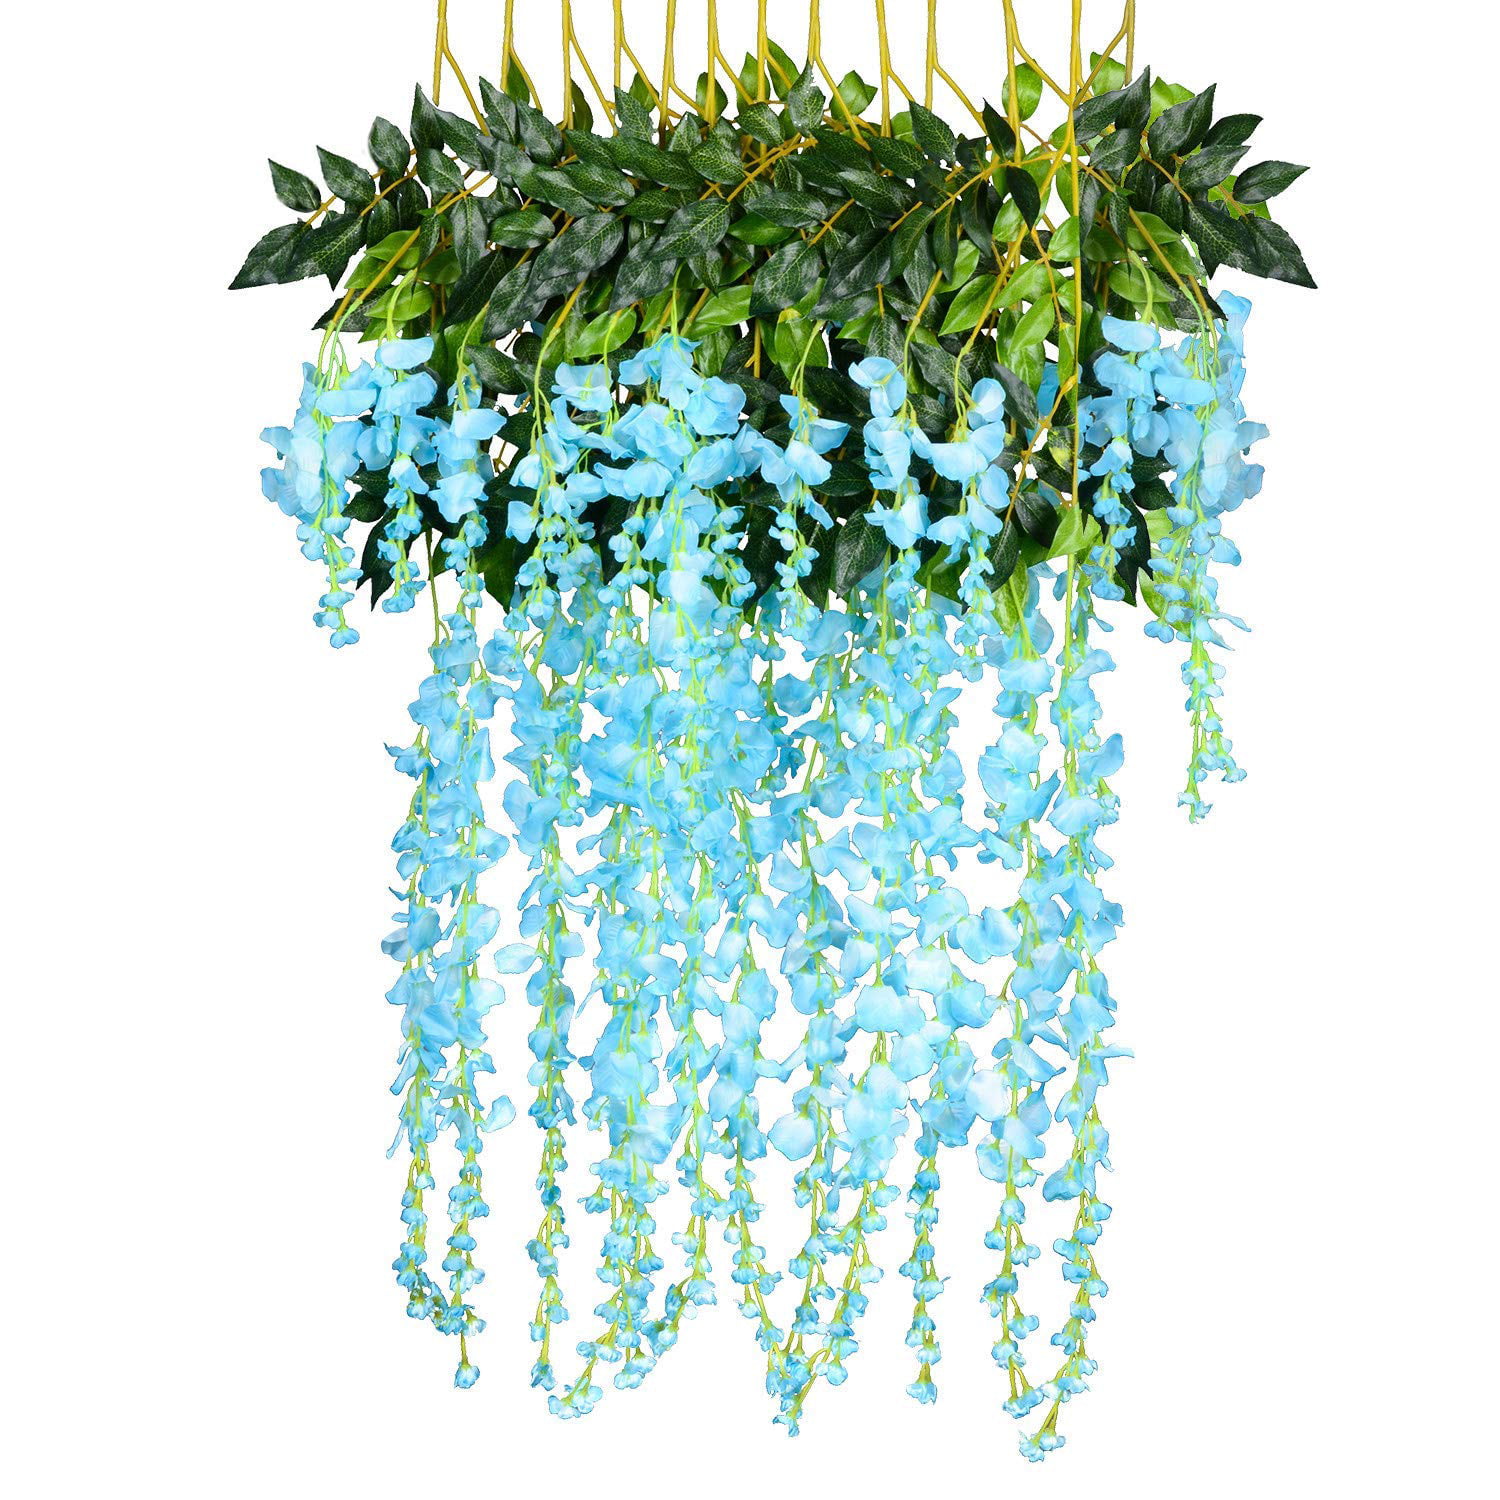 3.6 Feet Artificial flower Silk Wisteria Vine Rattan Fake Wisteria Garland Hanging Flowers for Home Garden Party Wall Wedding Decor,6 Pieces WHITE 2 DearHouse